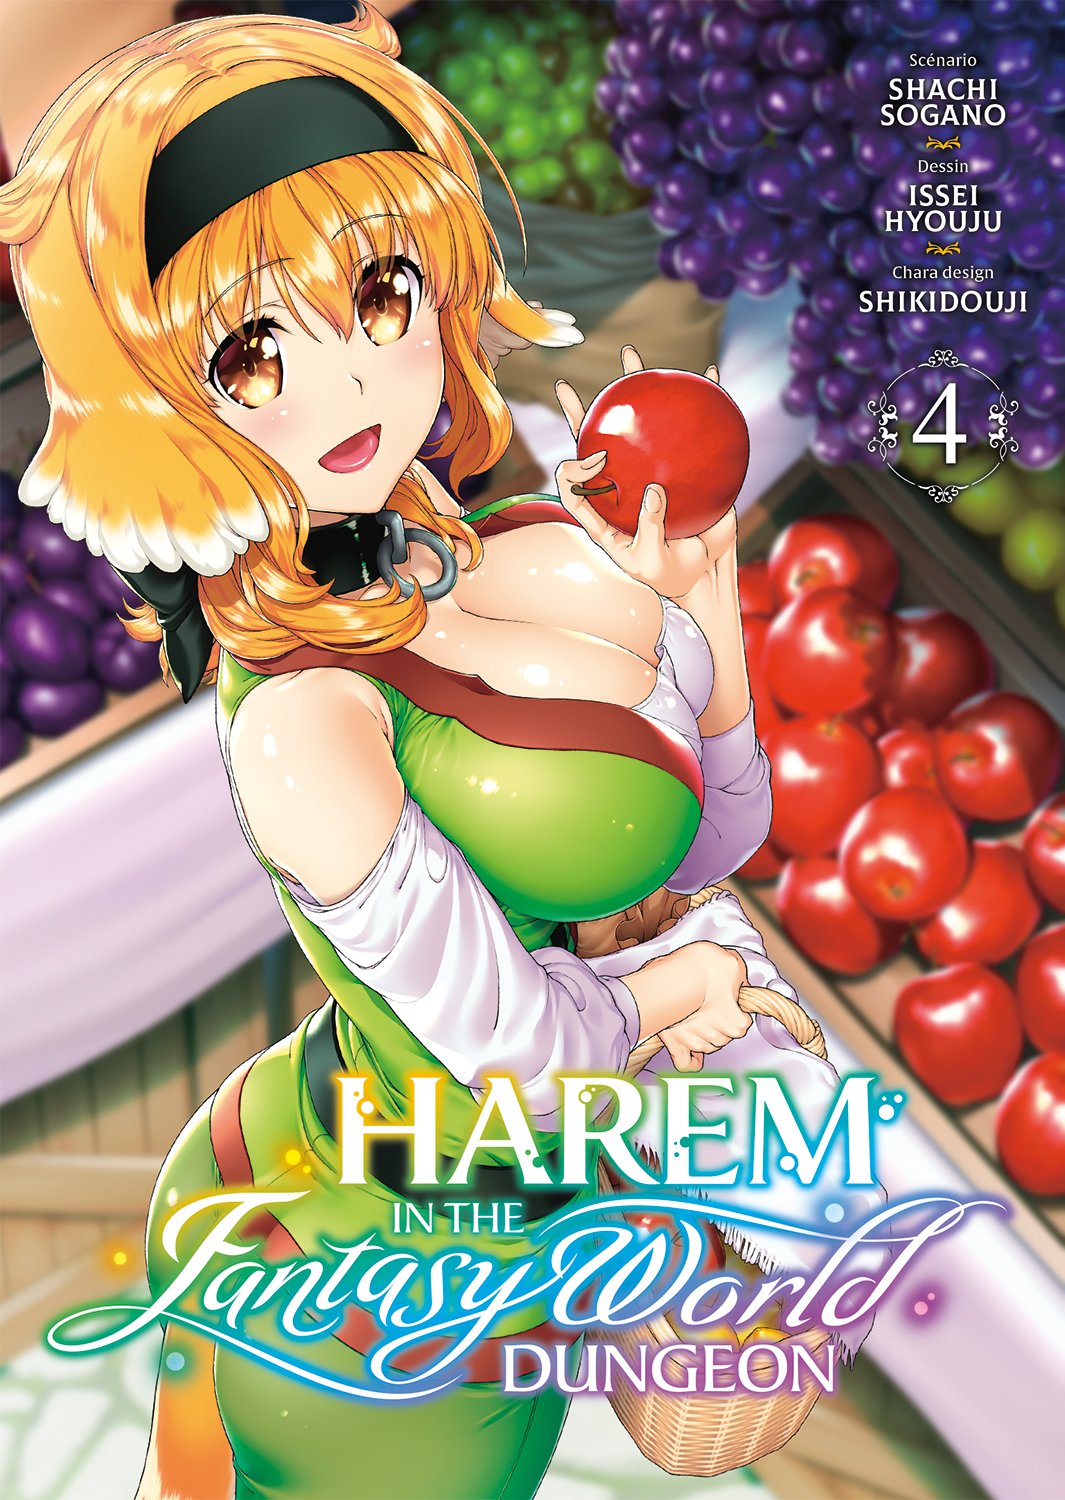 A Harem In The Fantasy World Dungeon Harem in the Fantasy World Dungeon - Tome 4 - Livre (Manga) - Meian